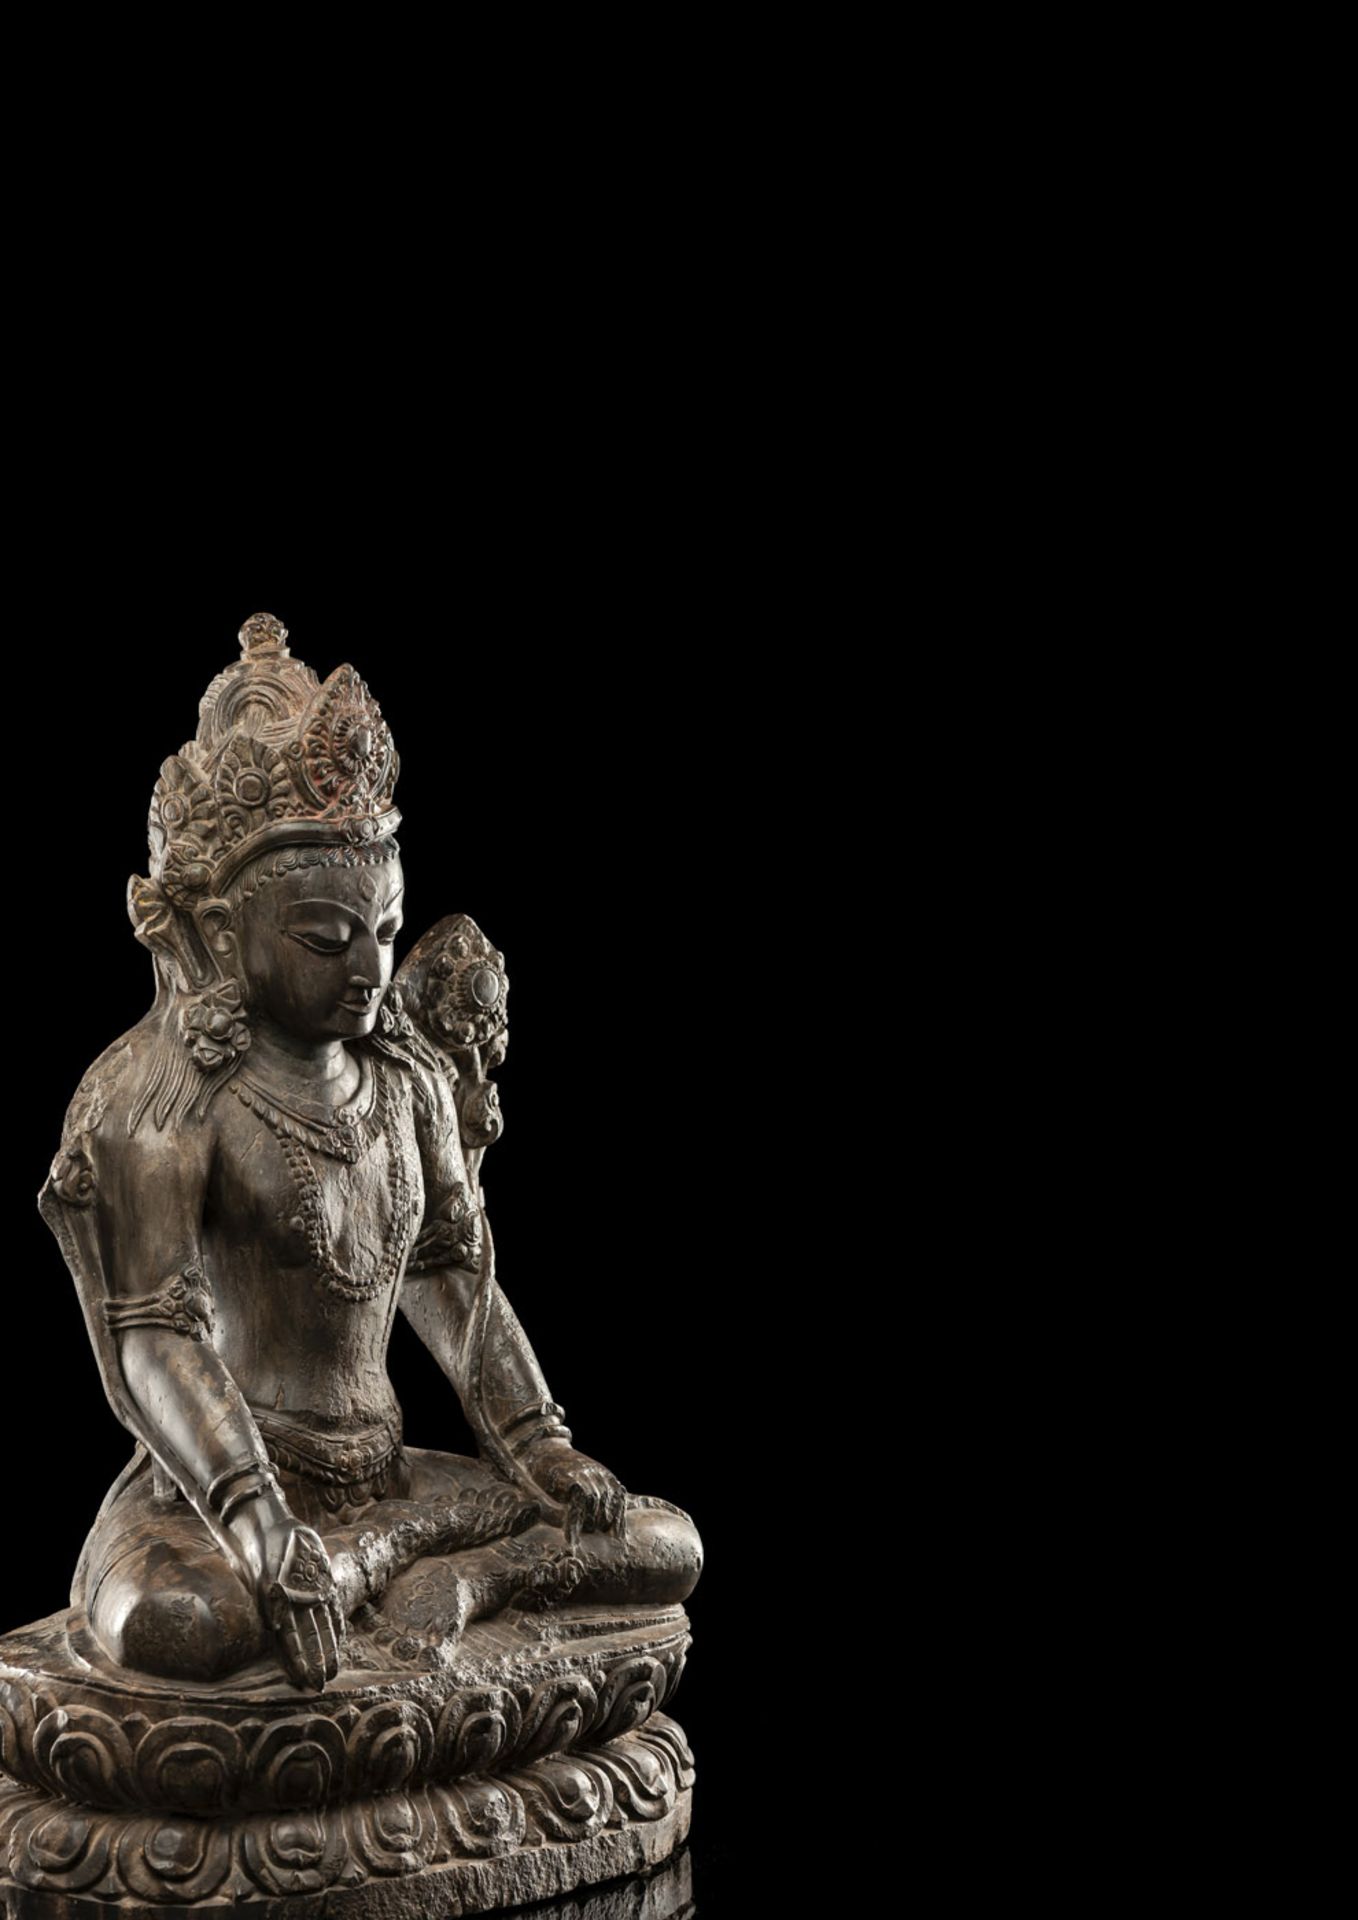 A RARE AND LARGE CARVED STONE FIGURE OF PADMAPANI - Image 2 of 5